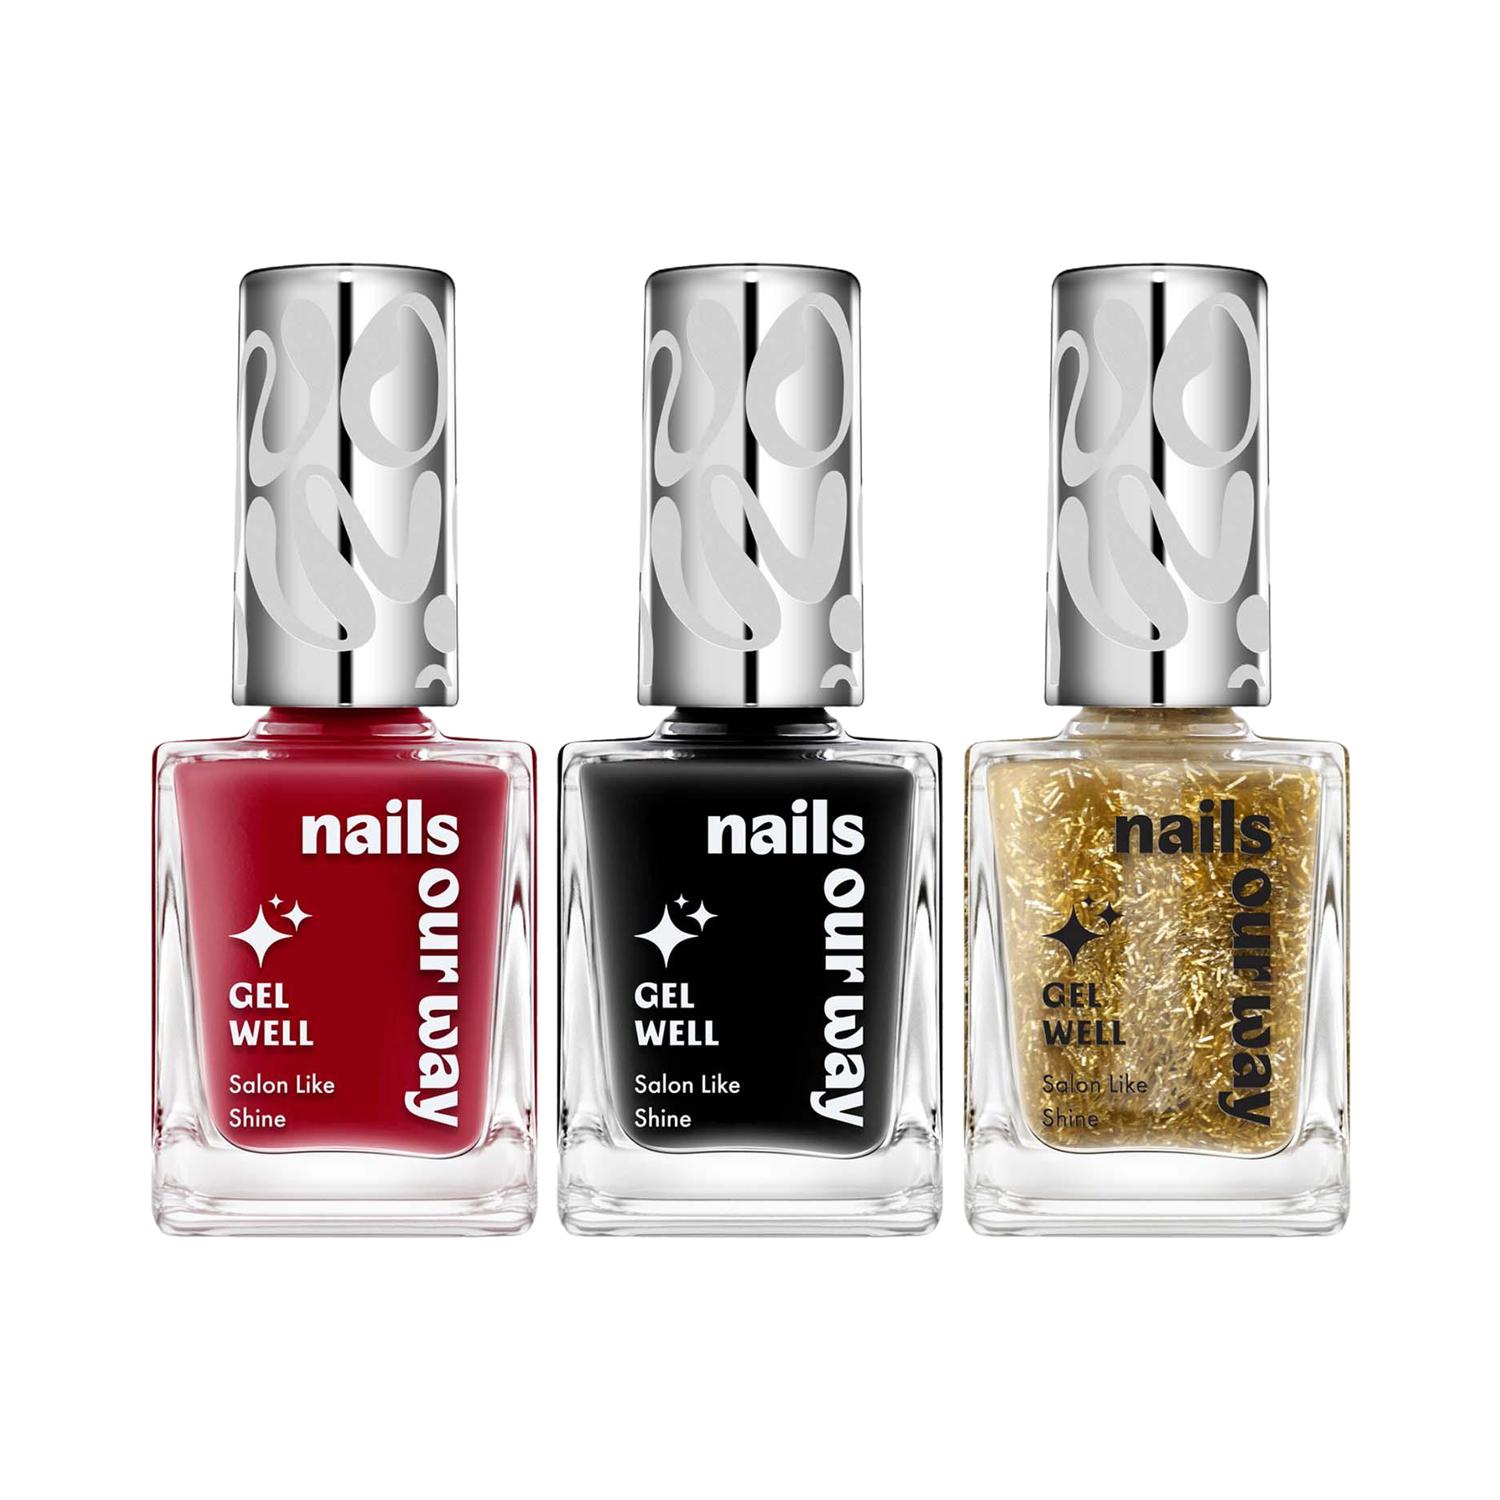 Nails Our Way | Nails Our Way Gel Well Nail Enamel Date Night Combo - Pk3